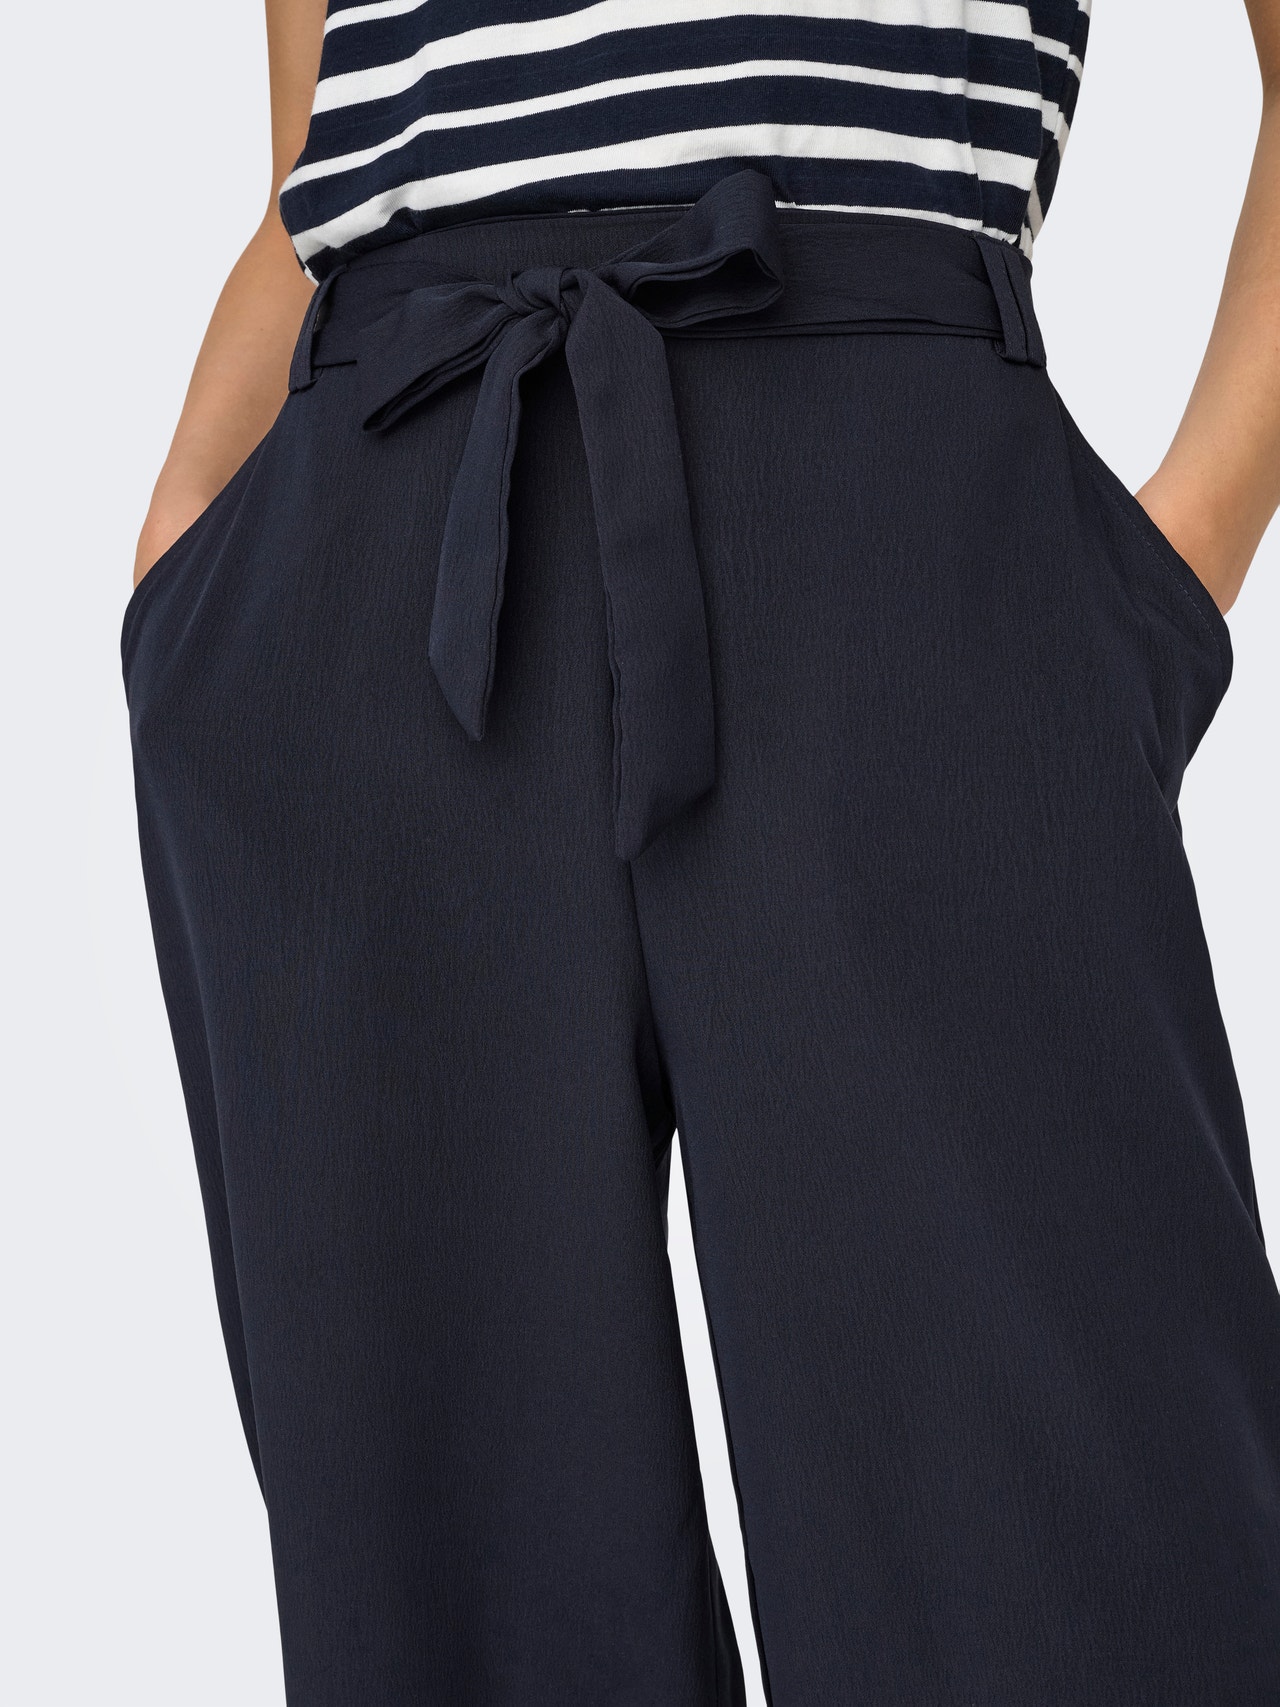 ONLY Trousers with tie belt -Night Sky - 15335560